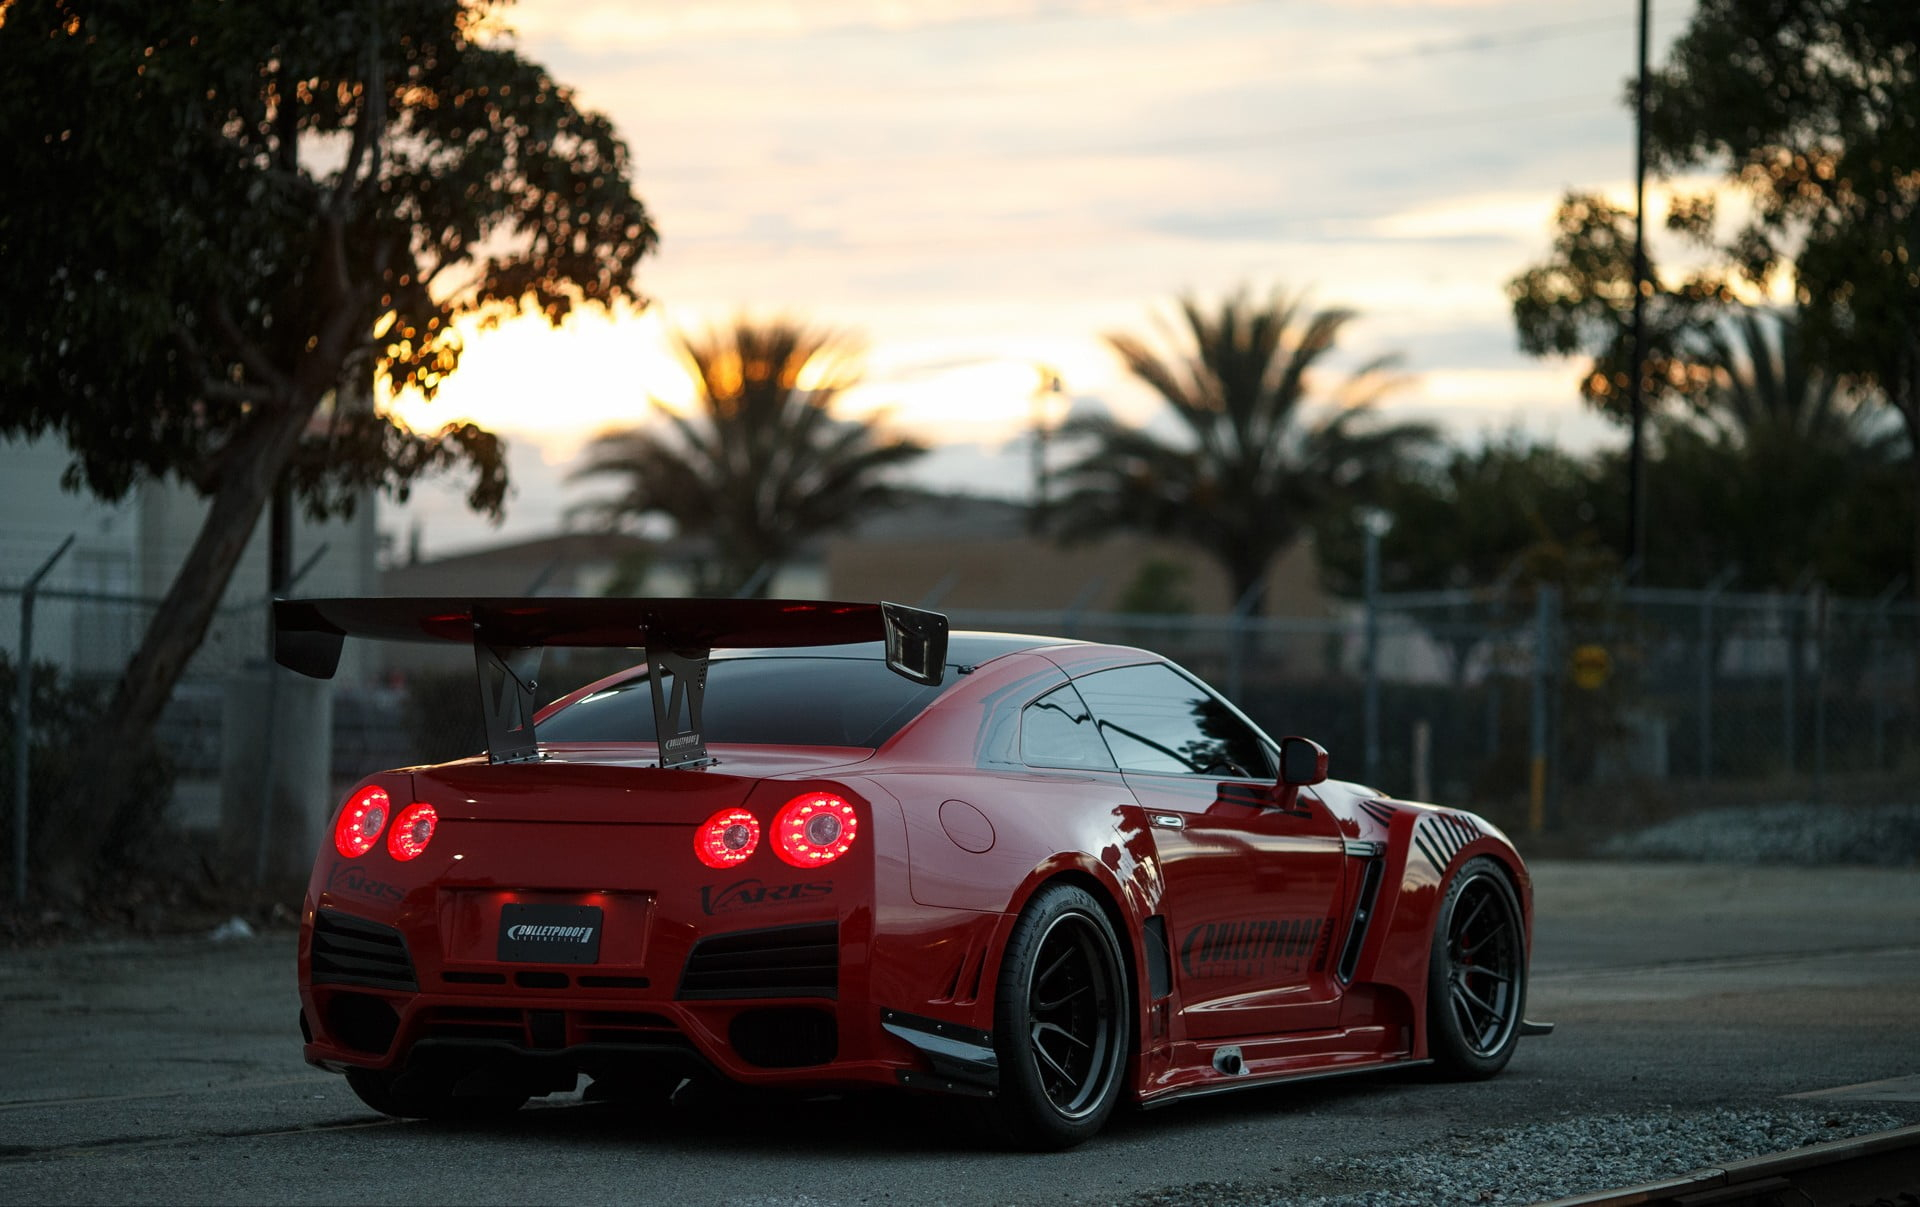 Red Sports Car, Nissan, Race Cars, Road, Nissan GT R, Red Cars Wallpaper • Wallpaper For You HD Wallpaper For Desktop & Mobile